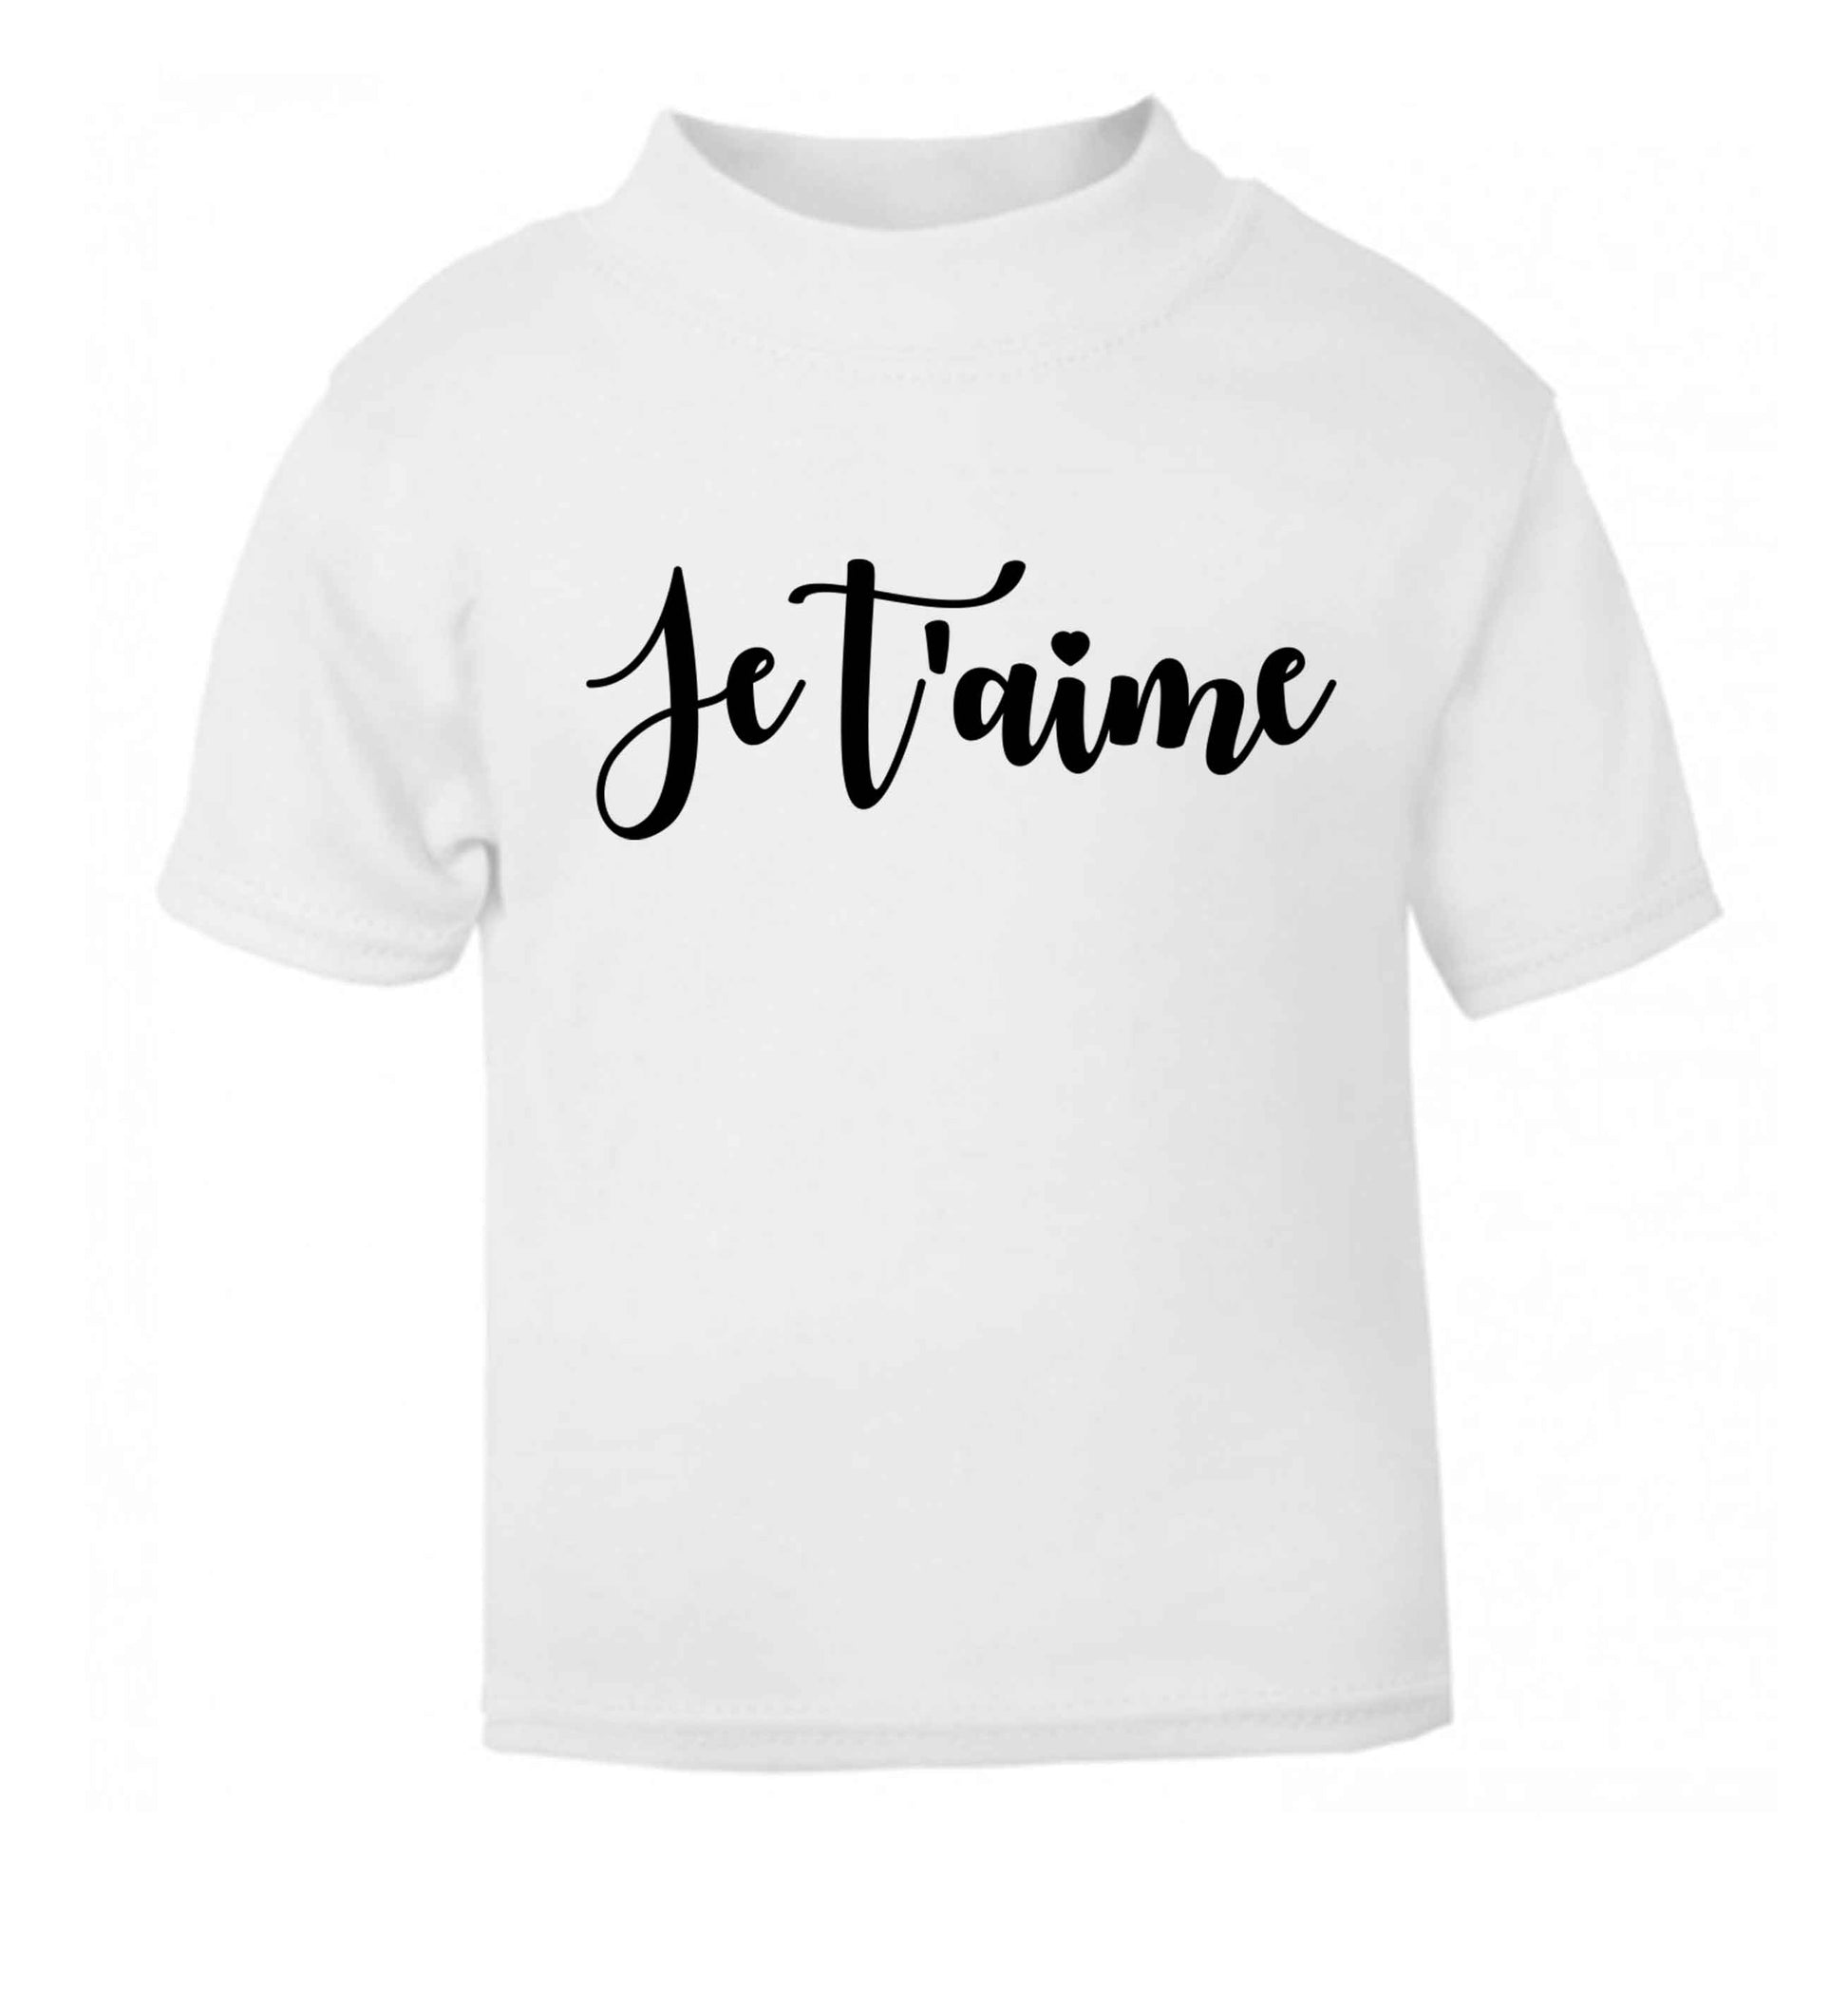 Je t'aime white baby toddler Tshirt 2 Years